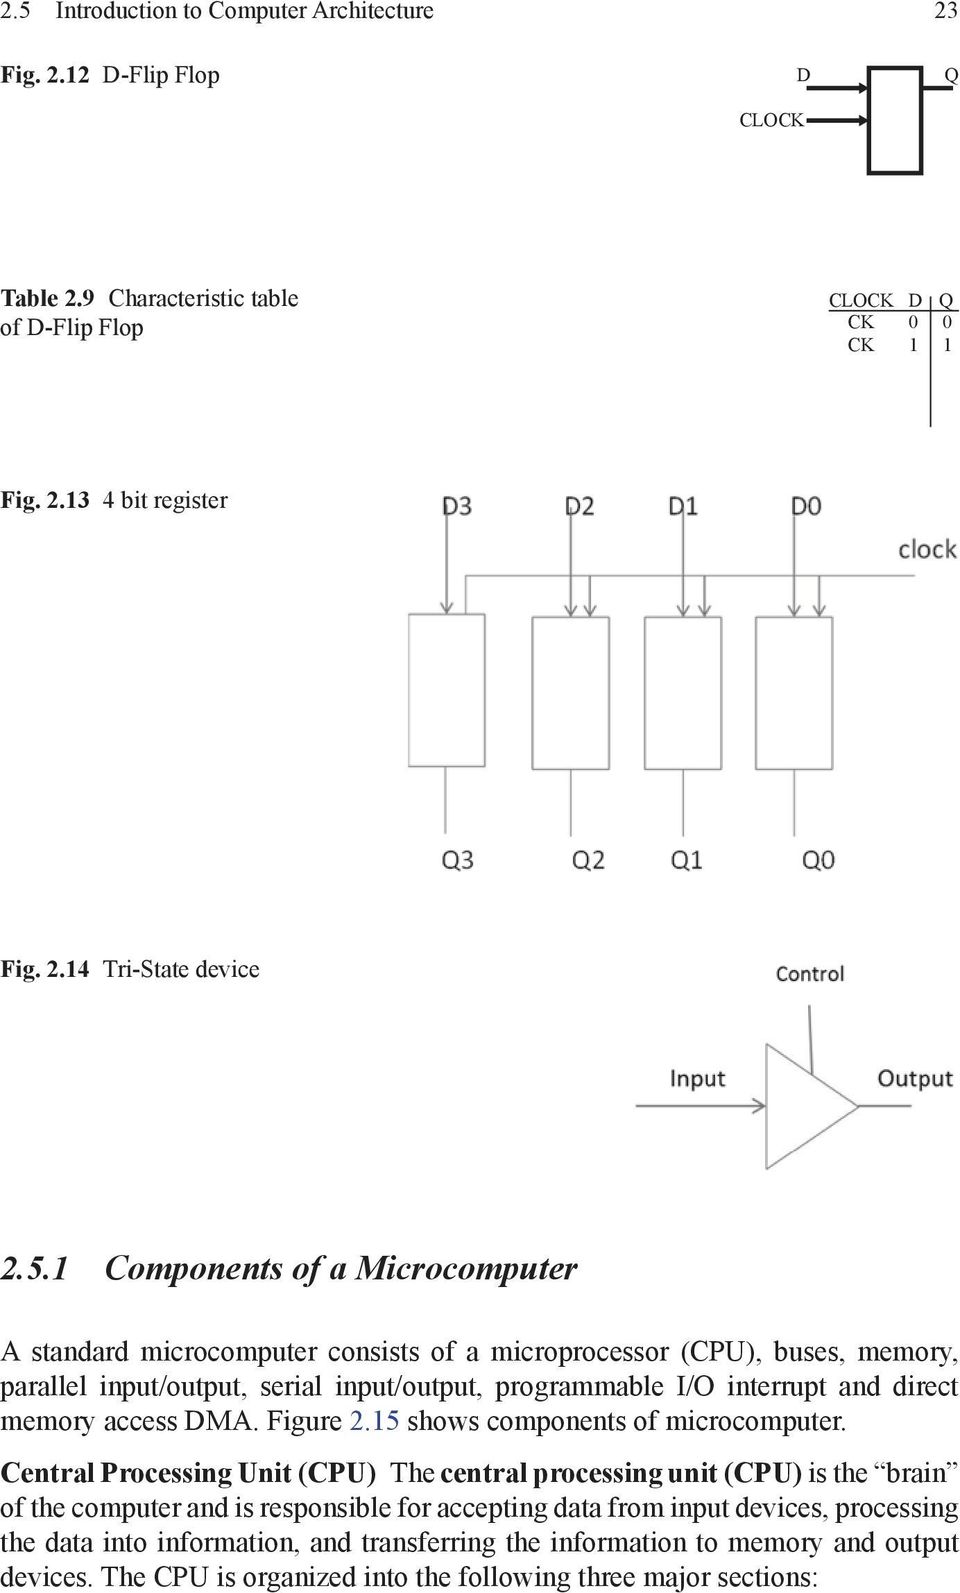 access DMA. Figure 2.15 shows components of microcomputer.